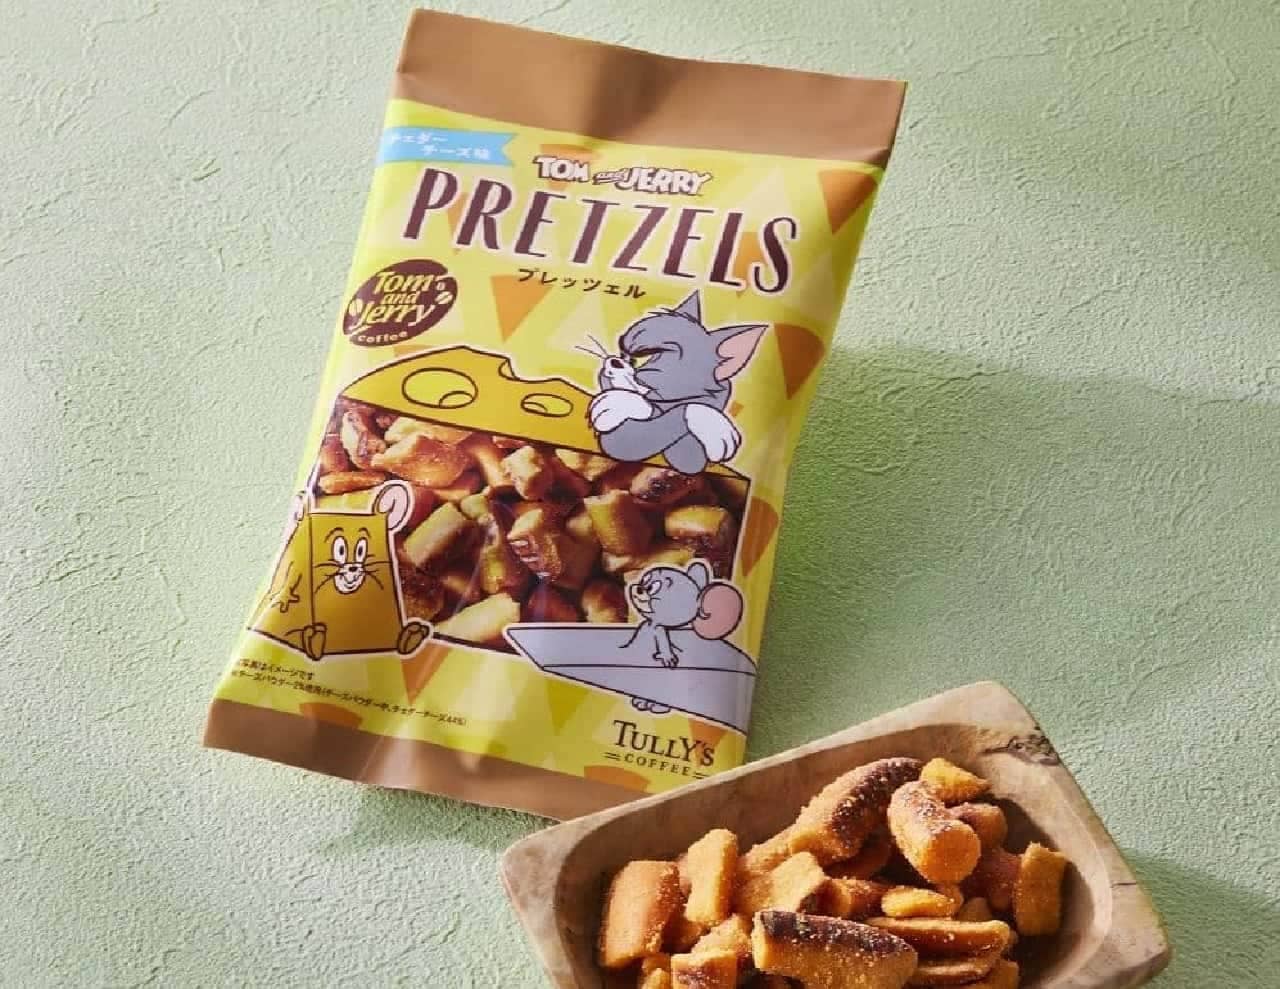 Tully's Coffee "Tom & Jerry Pretzel Cheddar Cheese